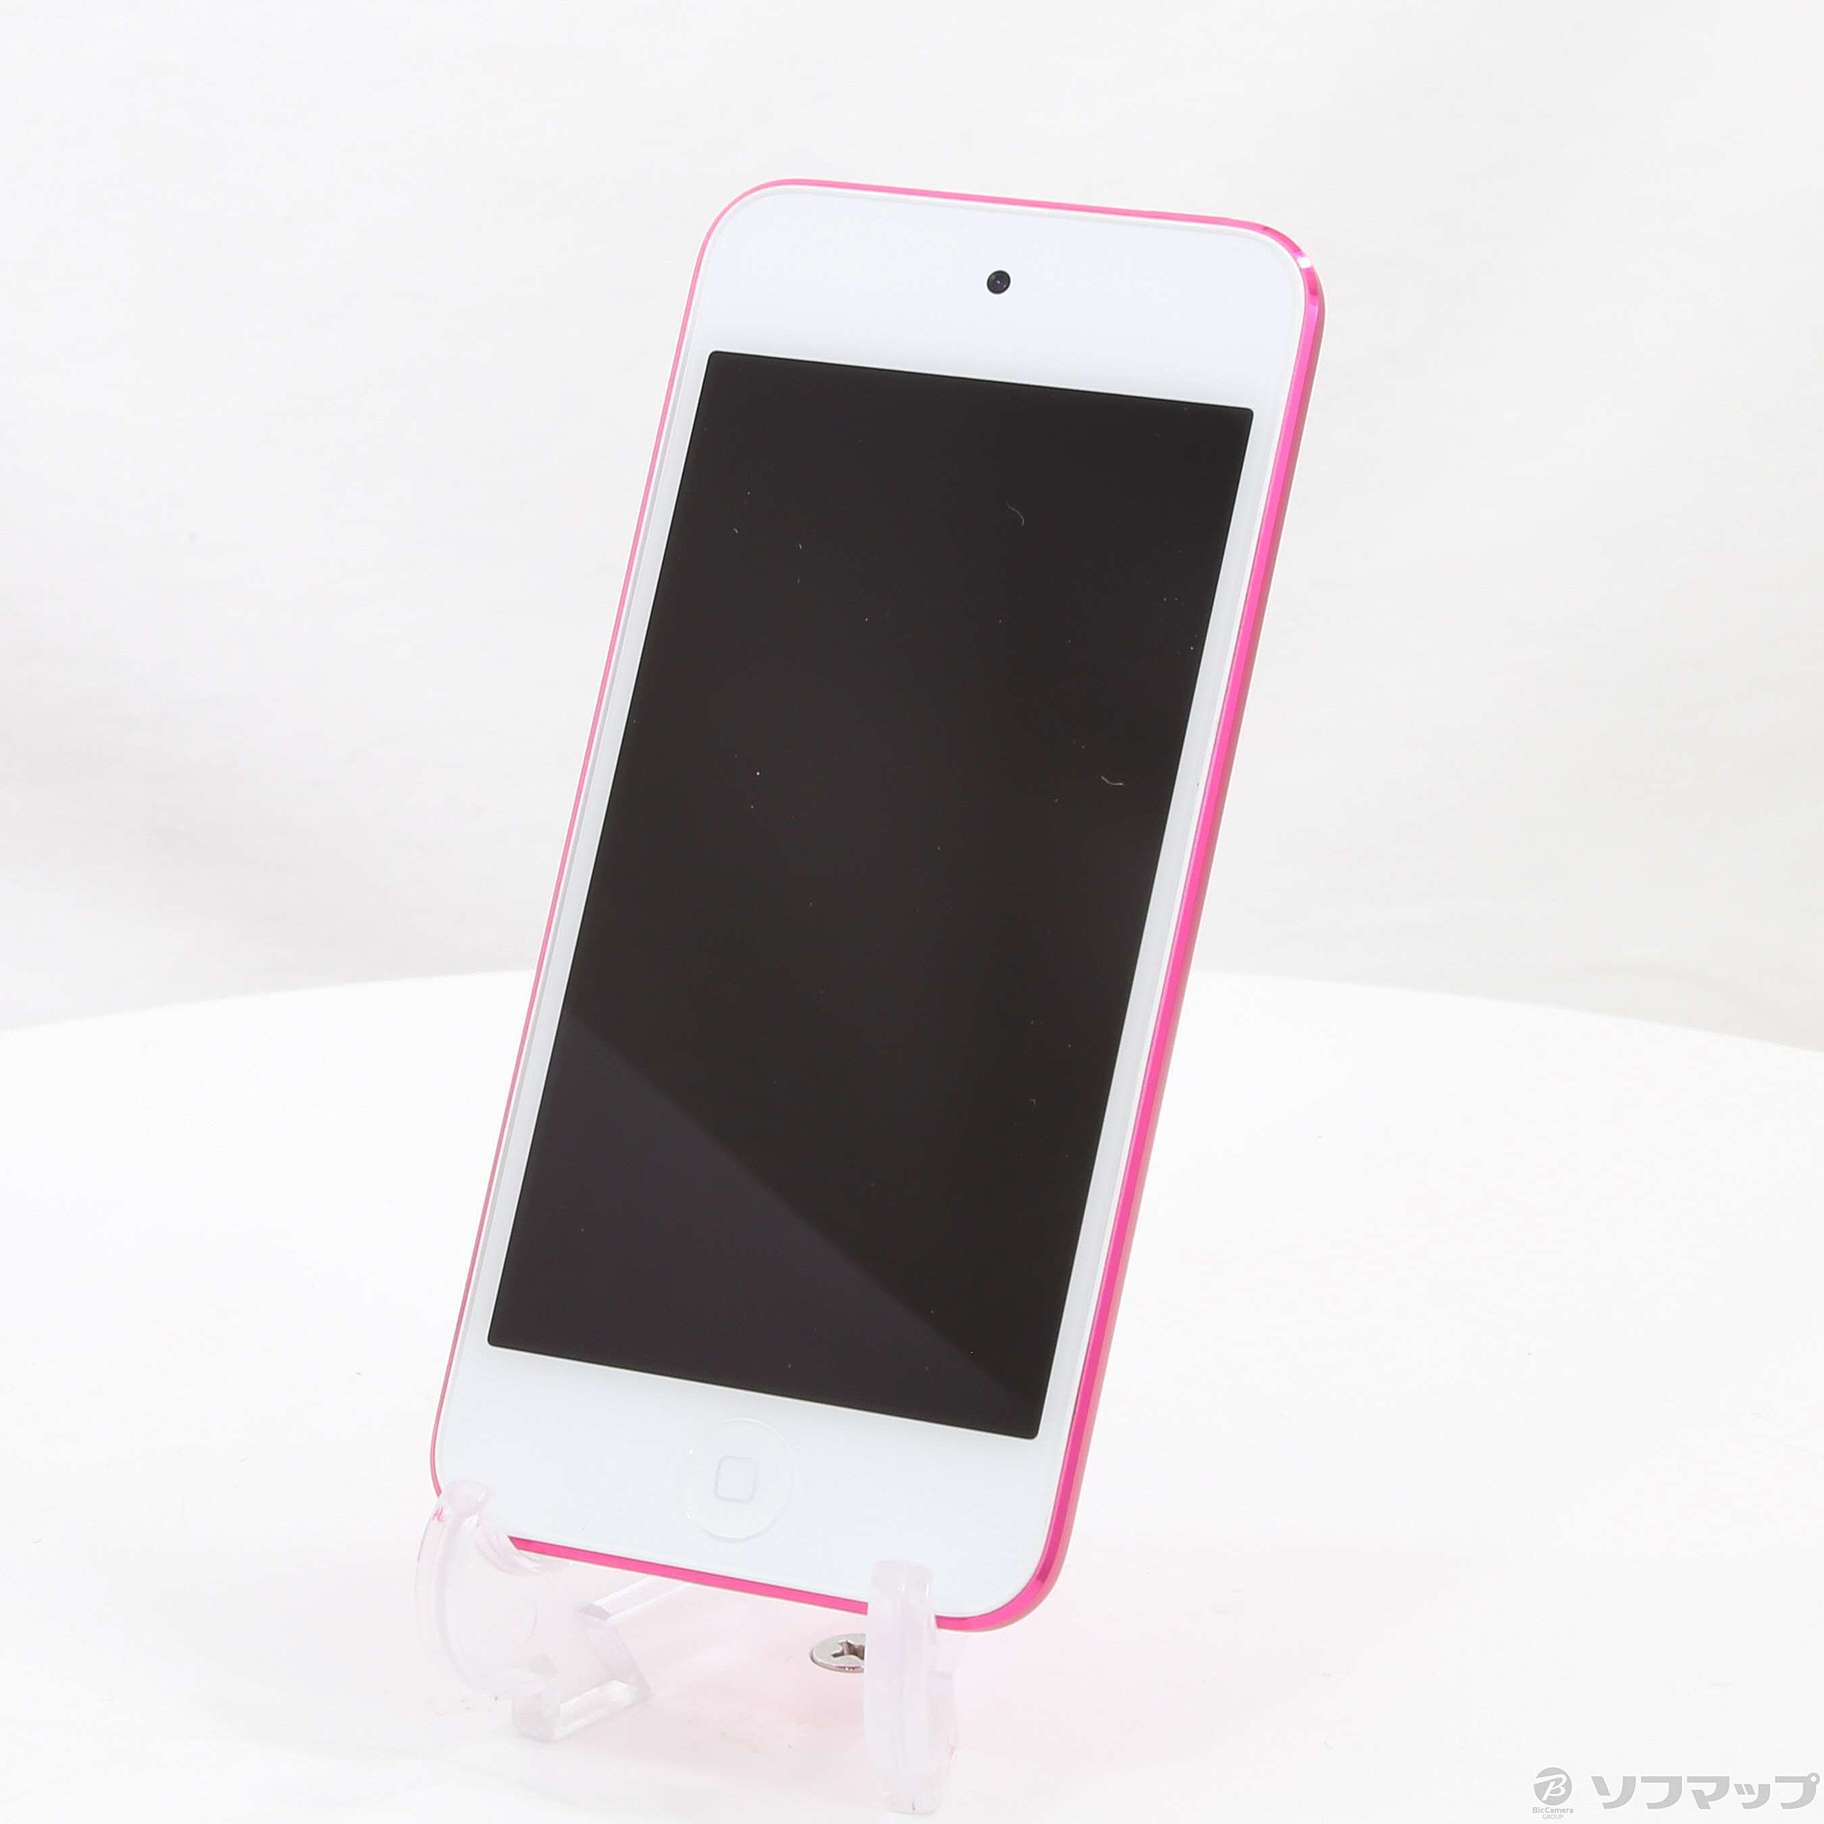 iPod touch ジャンク - 携帯電話